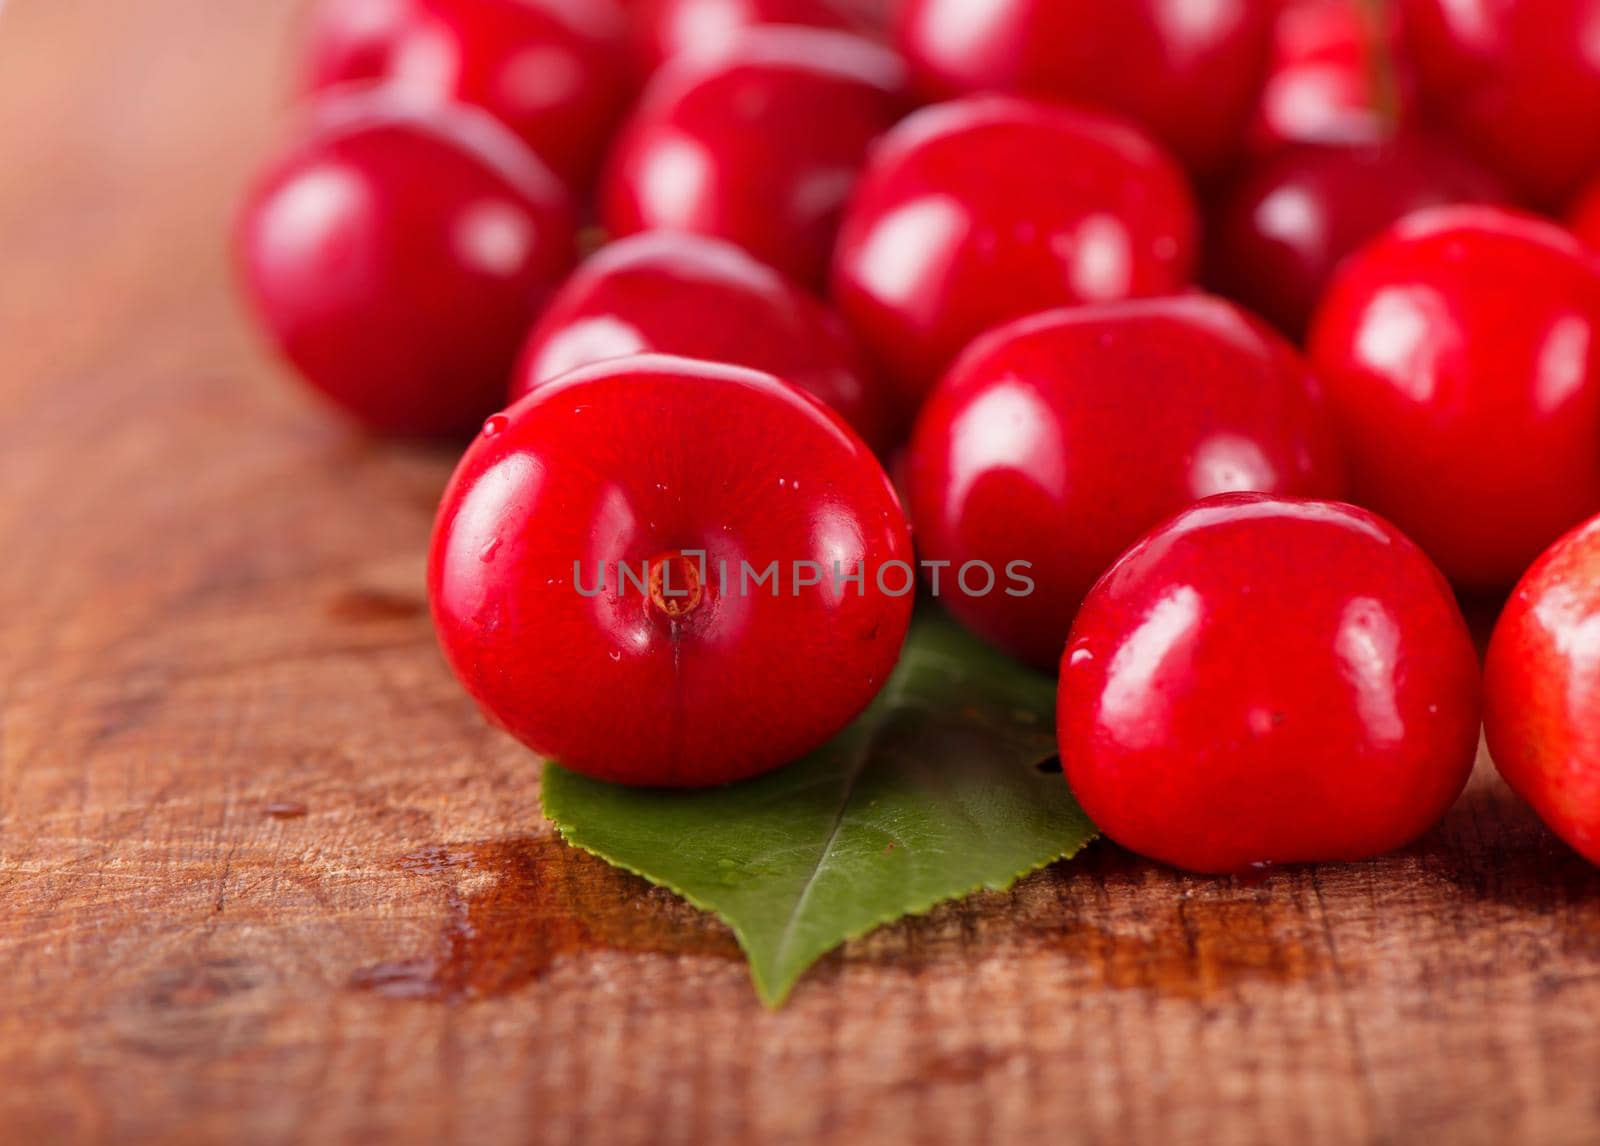 Cherries on wooden table with water drops by aprilphoto